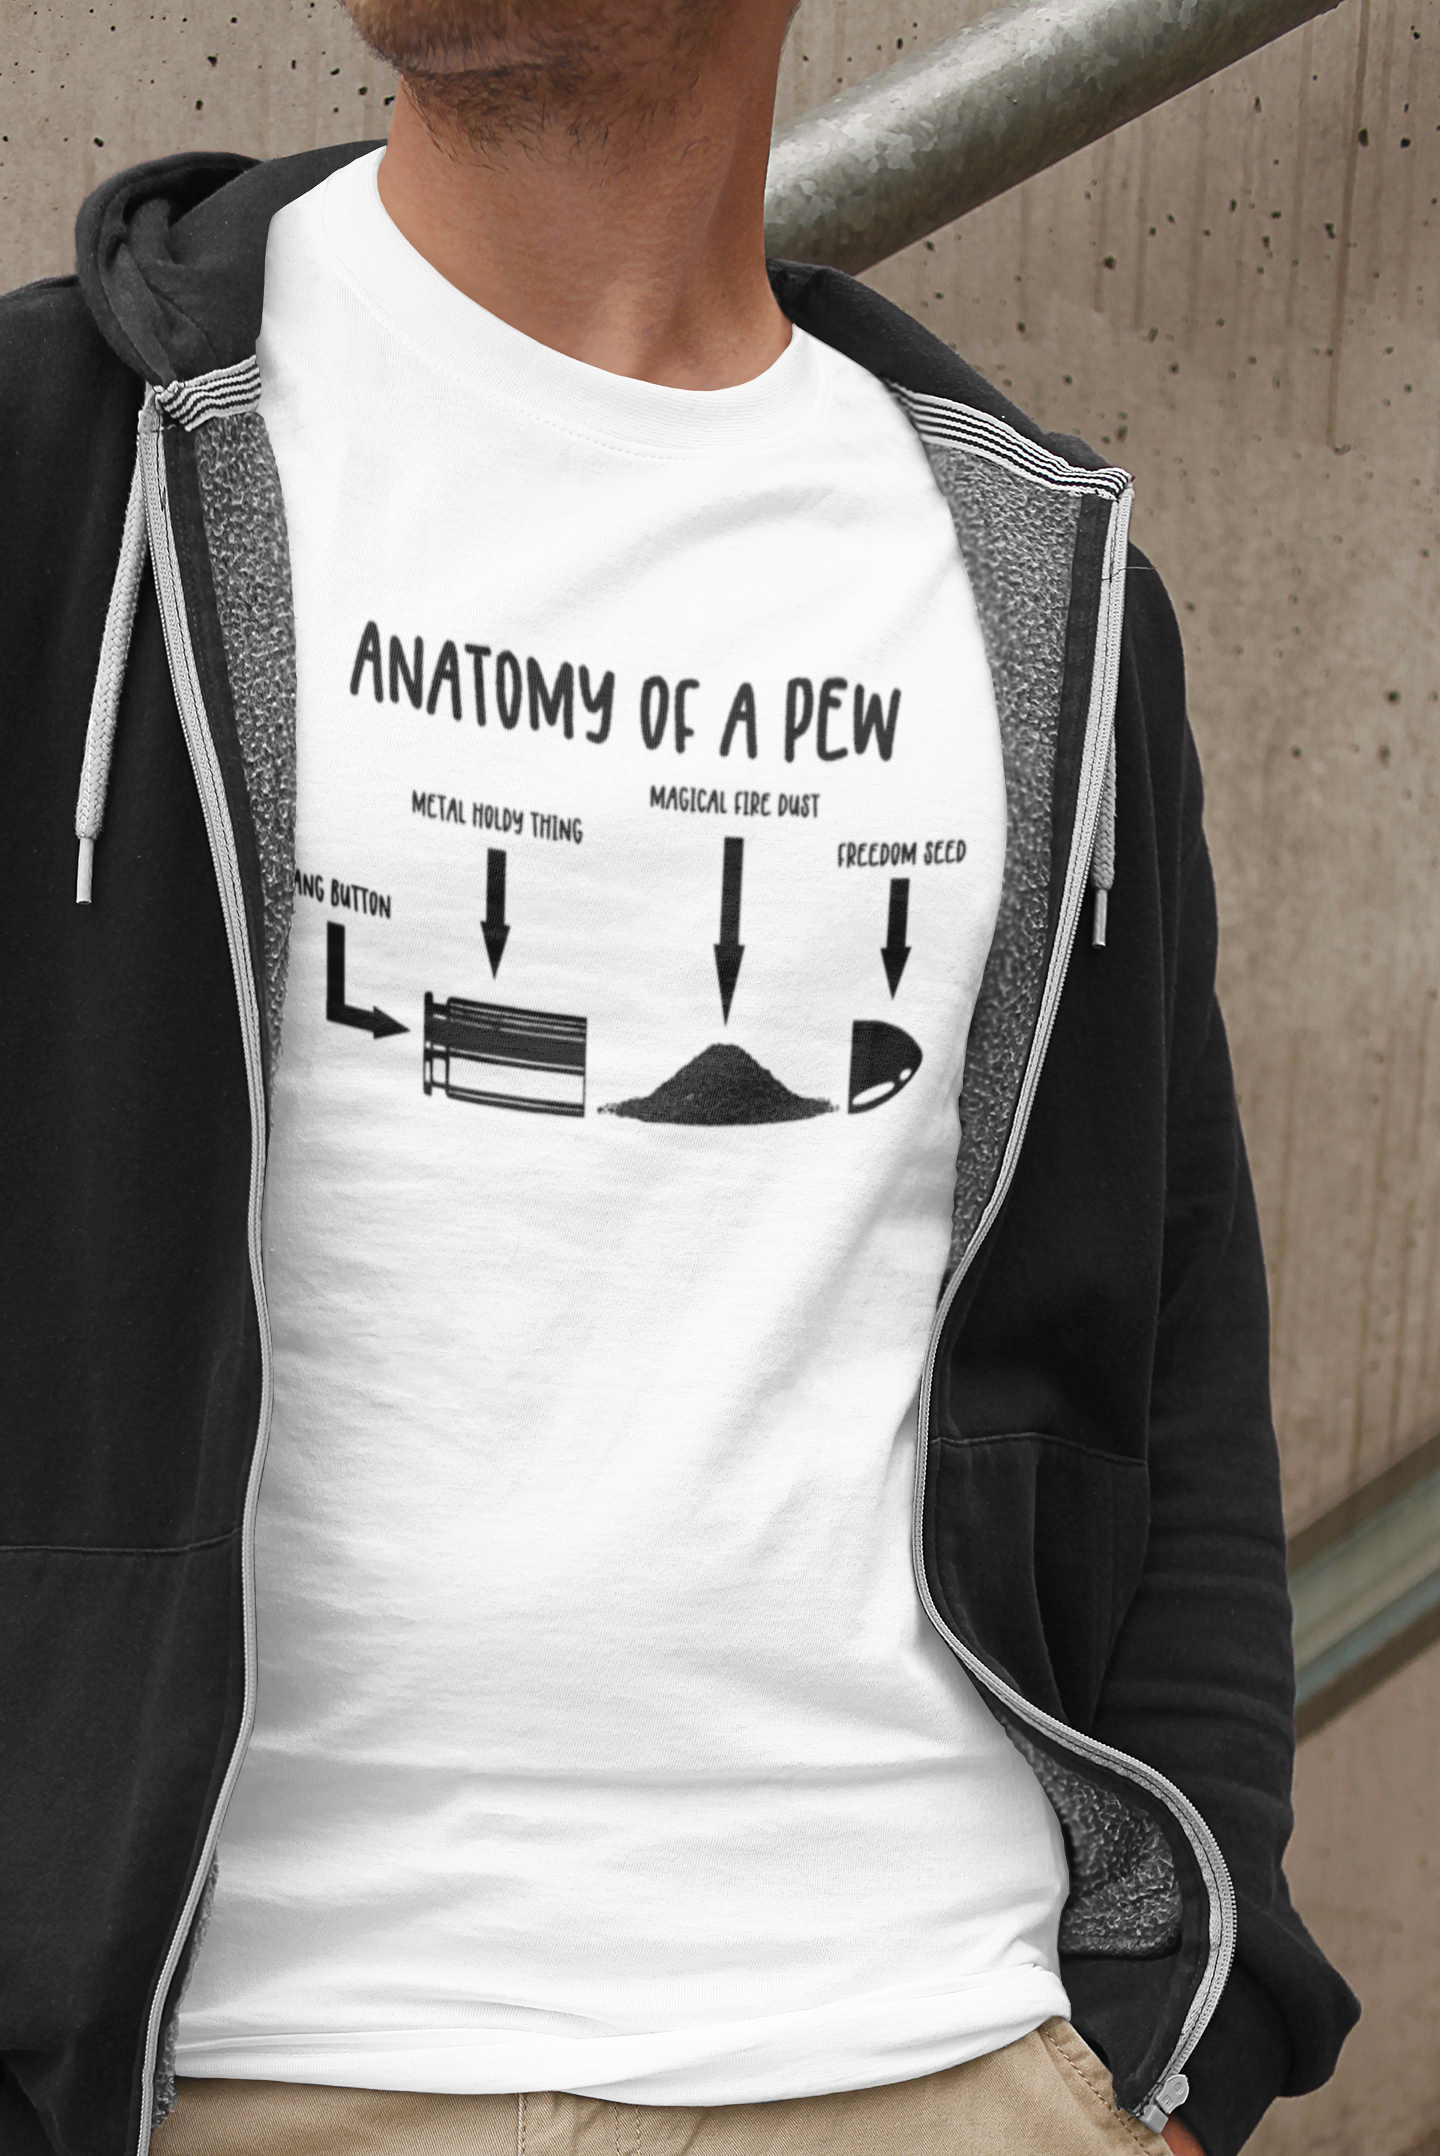 anatomy-of-a-pew-athletic-heather-grey-t-shirt-mockup-of-a-young-man-wearing-casual-garments